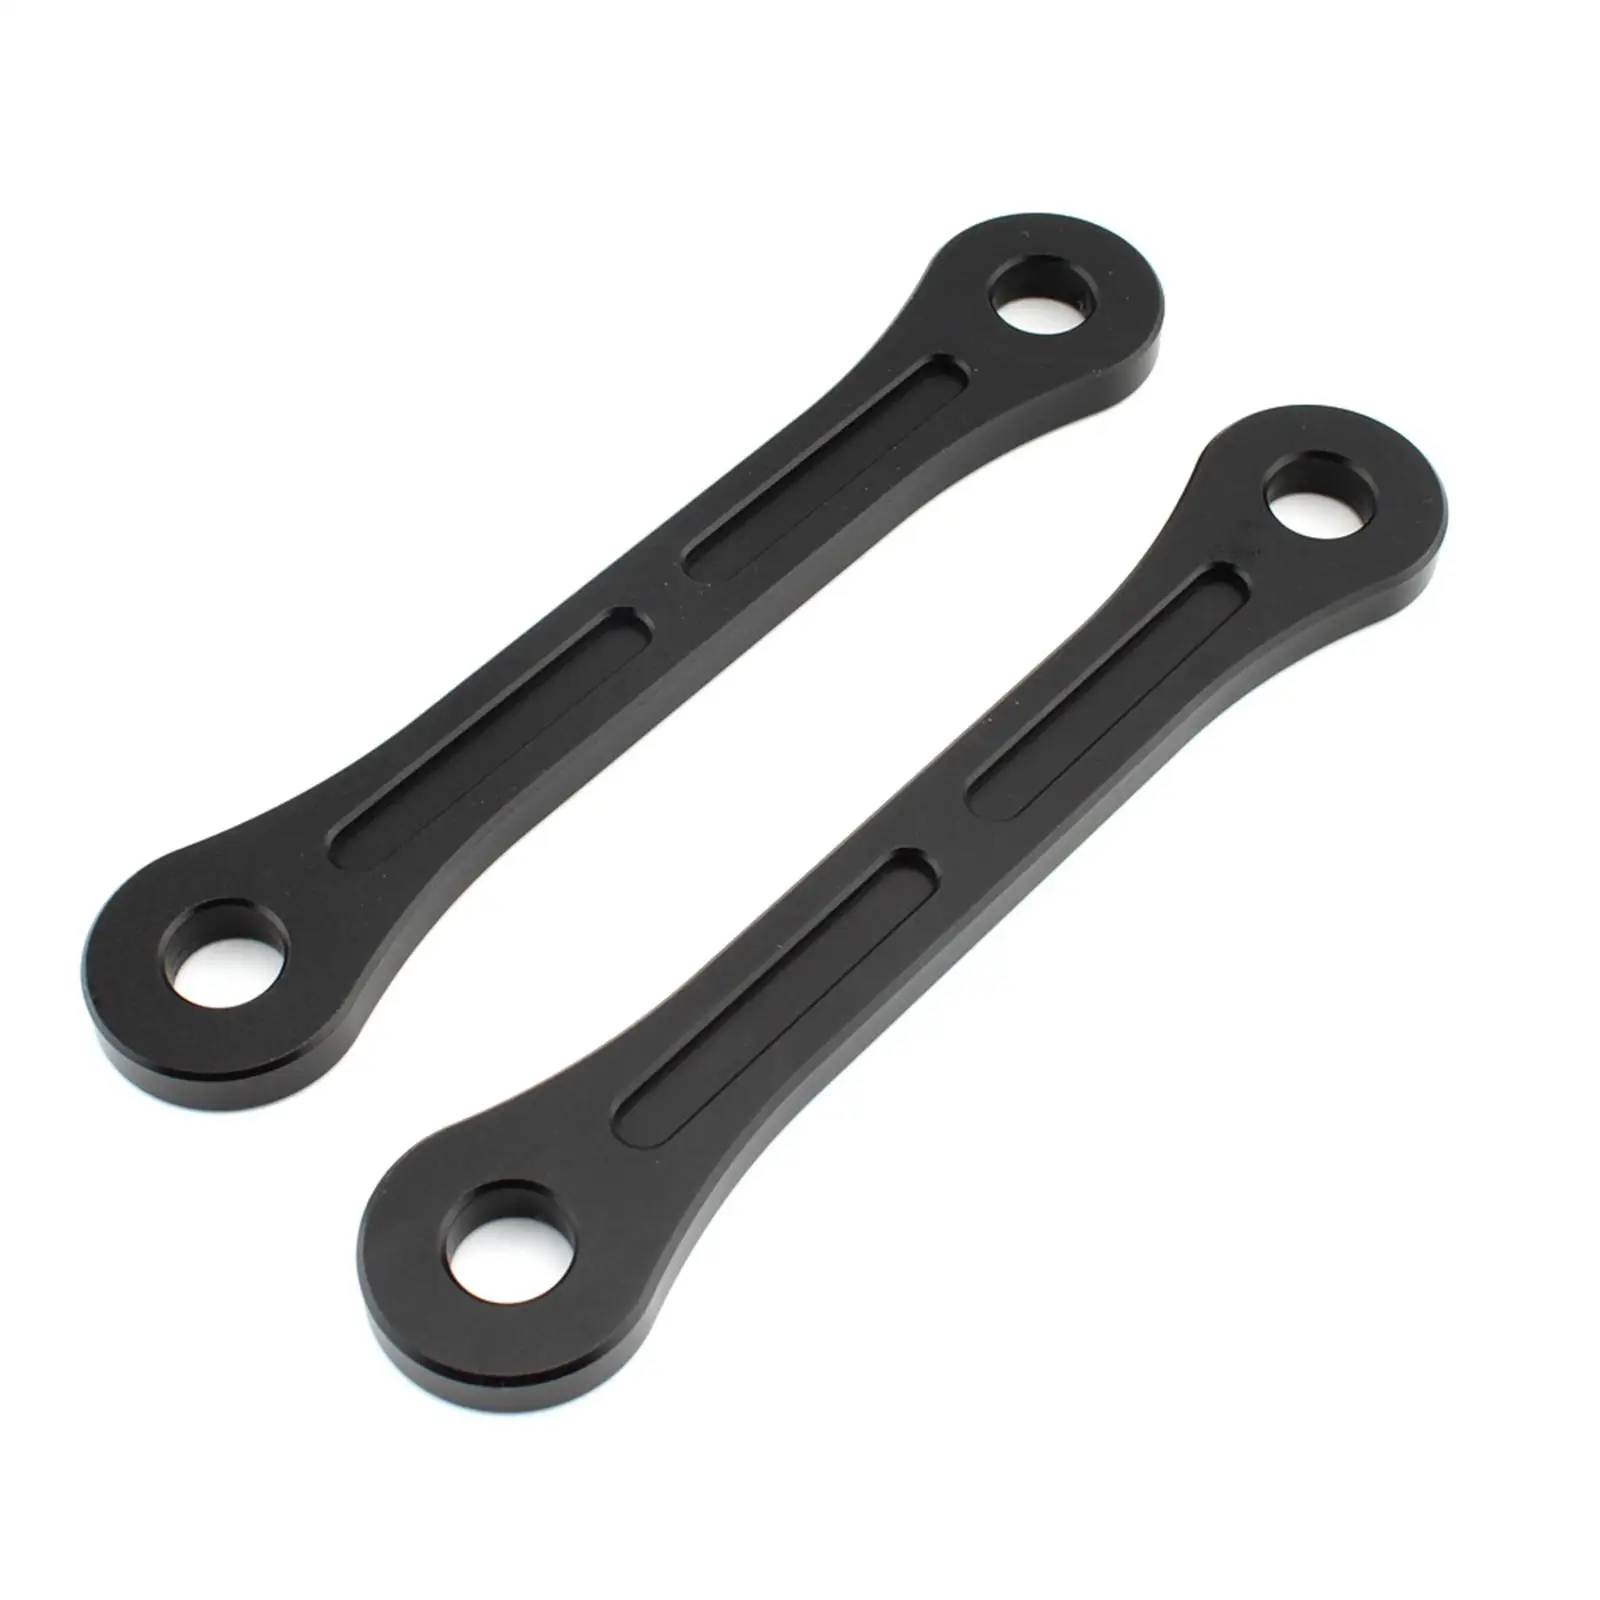 2 Pieces Motorcycle Lowering Link for Suzuki GSX1300R Hayabusa Replaces